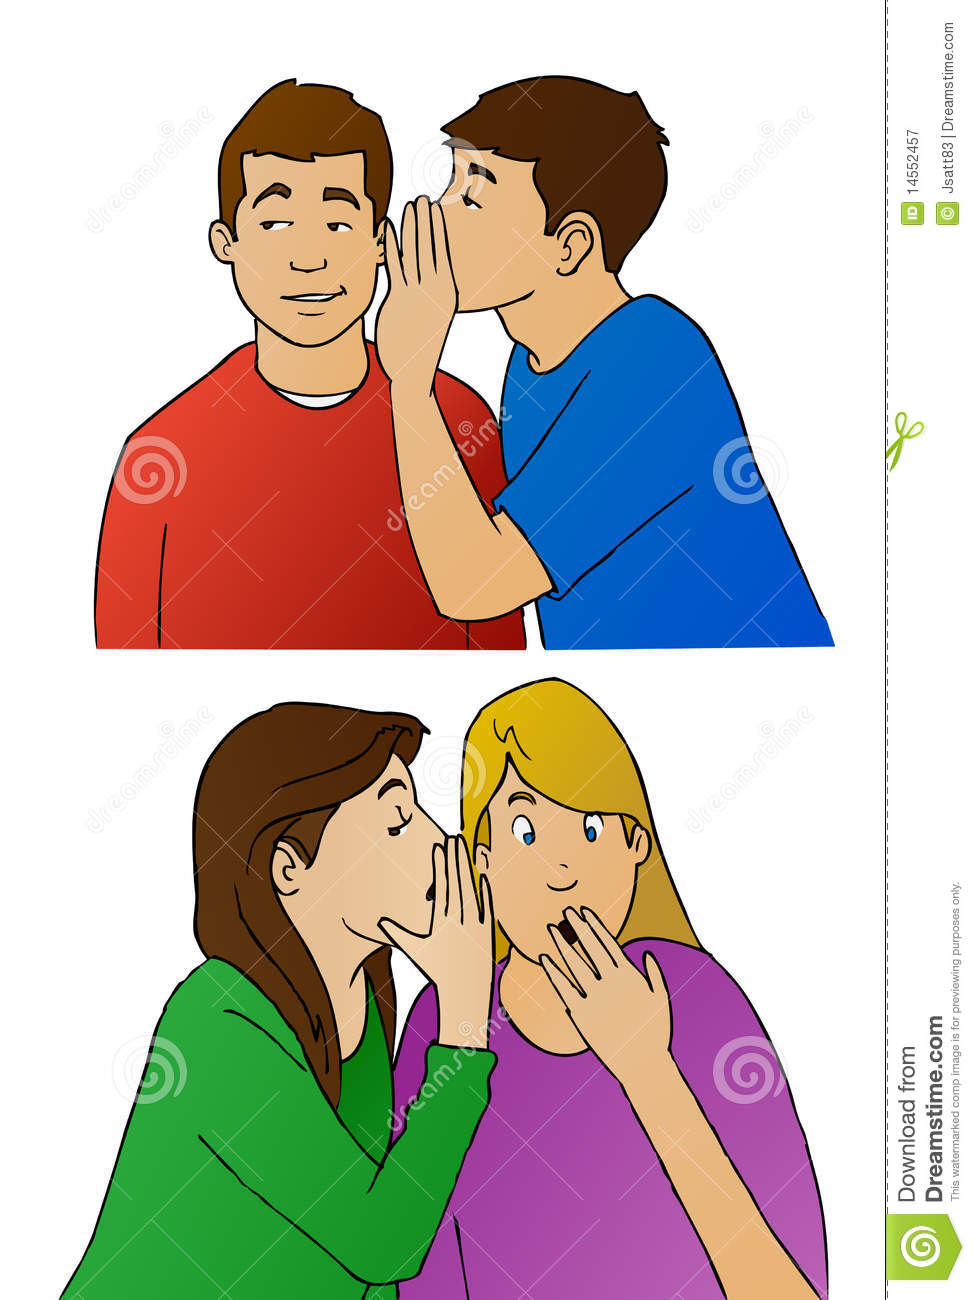 Rumors Whispers And Gossip Royalty Free Stock Photography   Image    